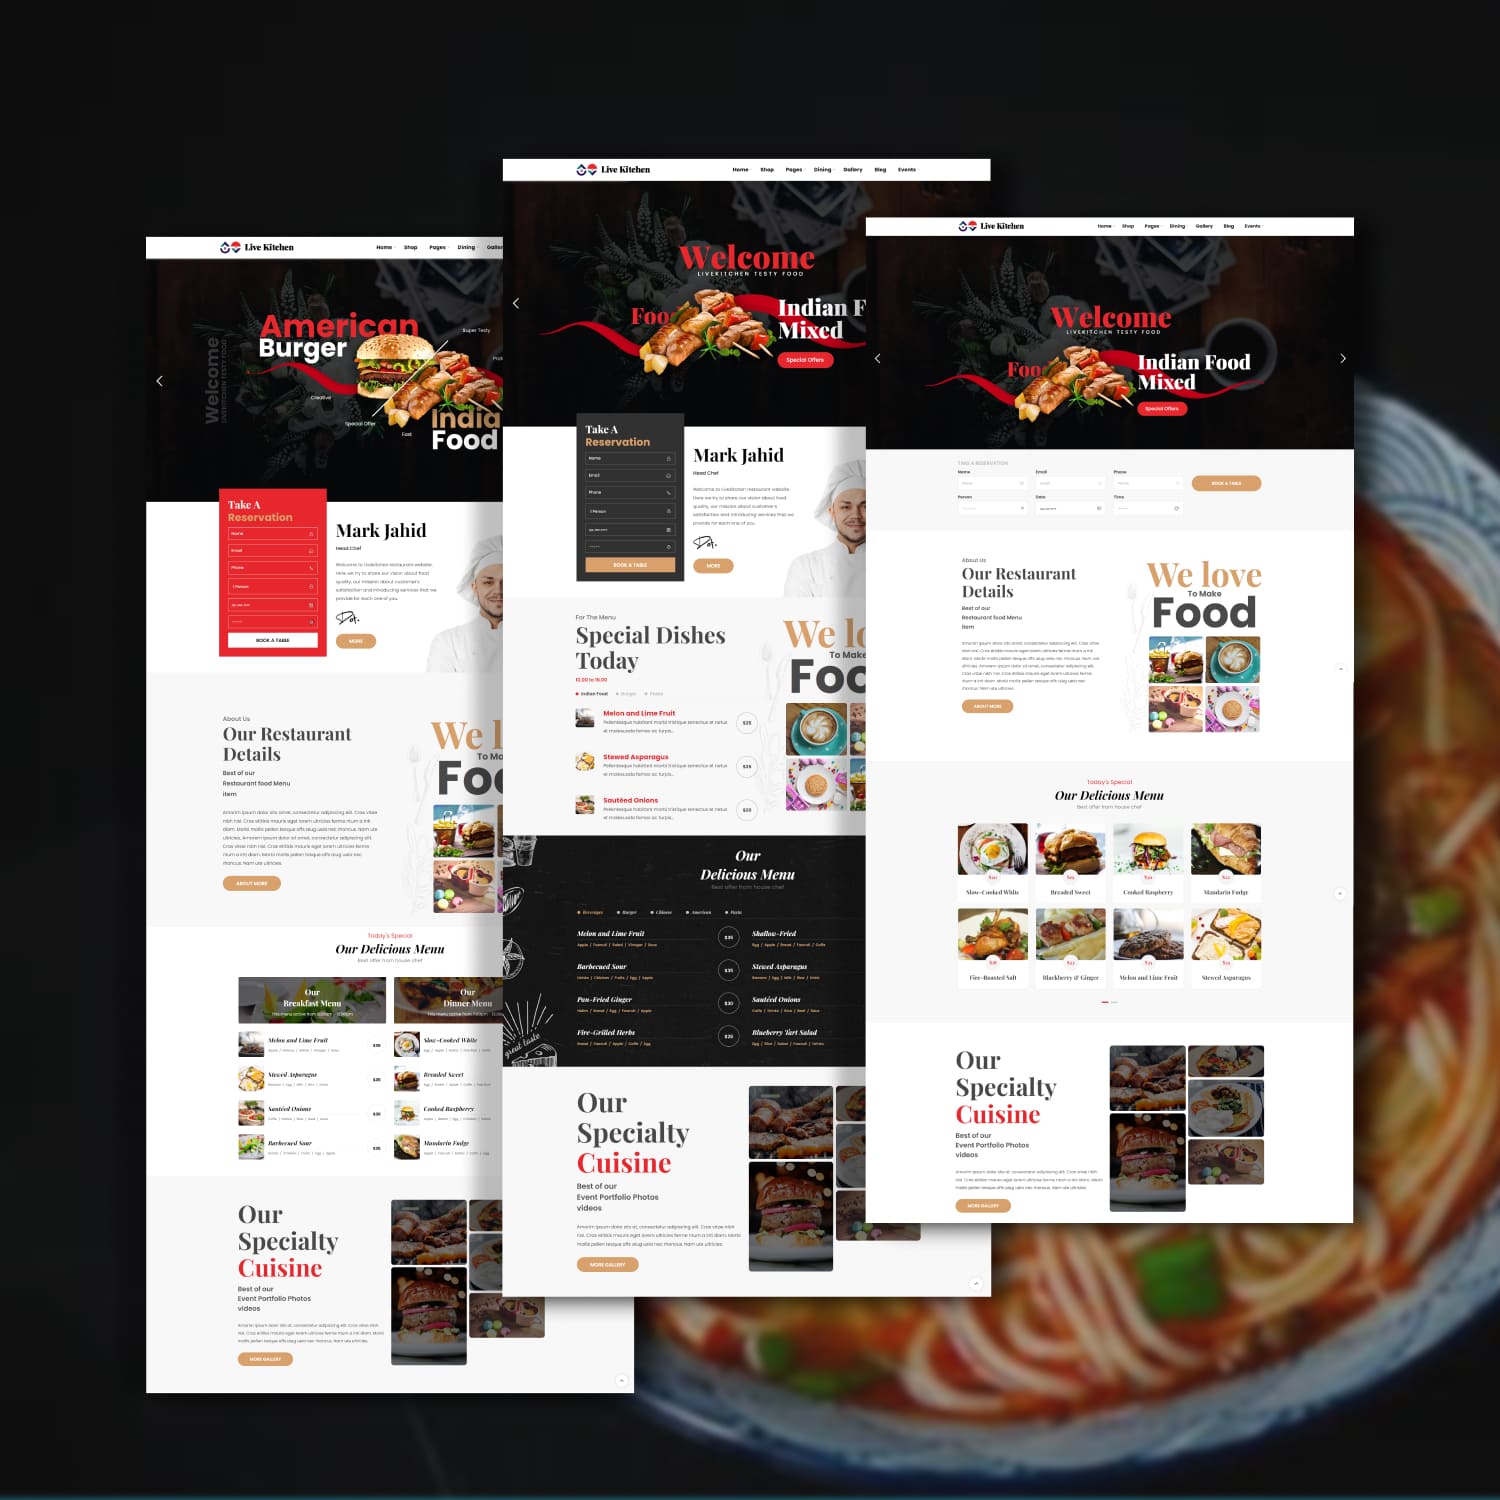 An article about restaurant details of the Livekitchen | Restaurant Cafe WordPress Theme.